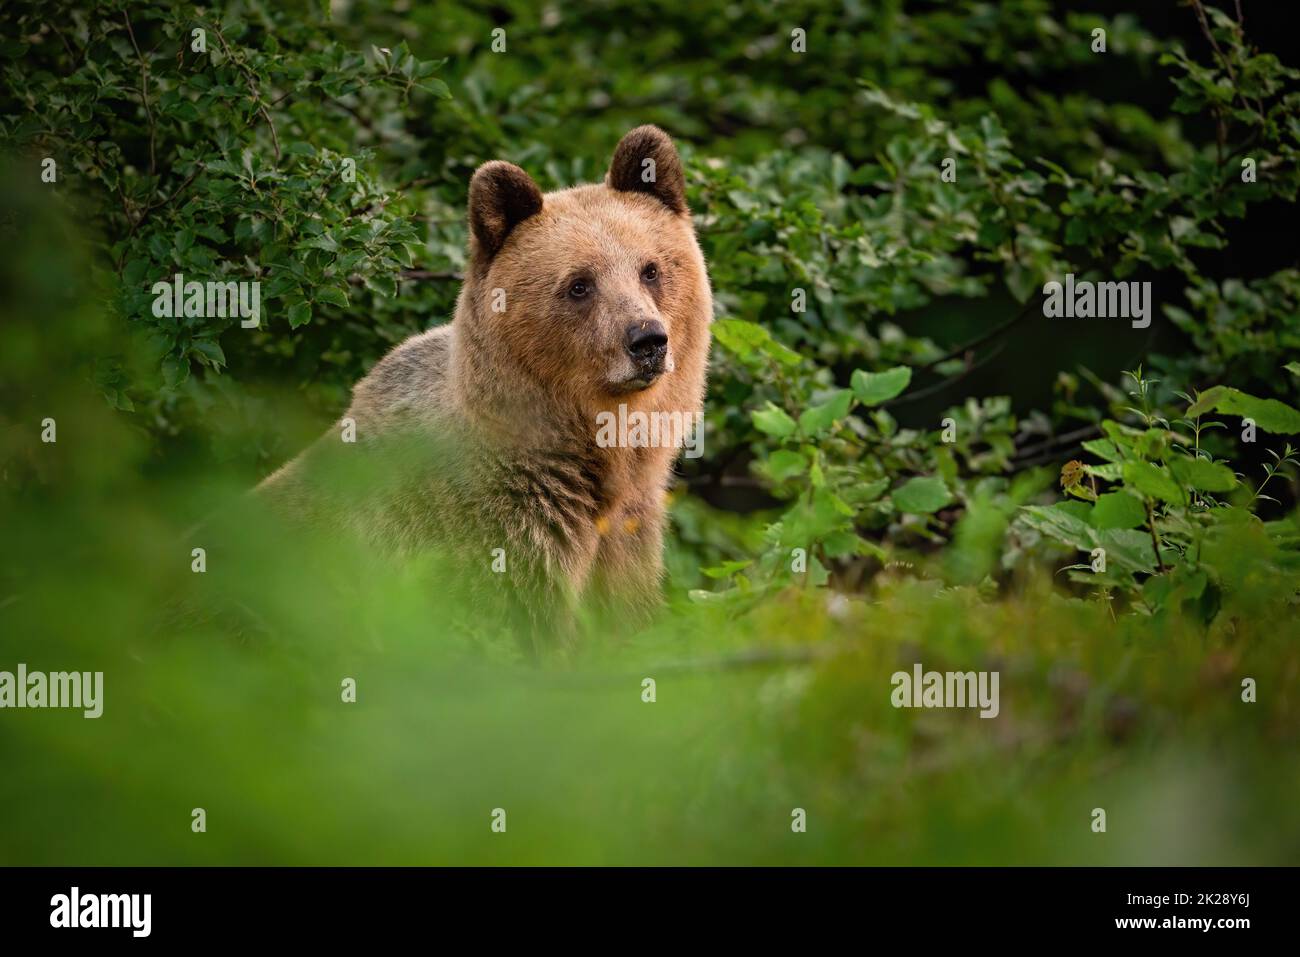 Brown bear hiding behind the bush in summer nature Stock Photo